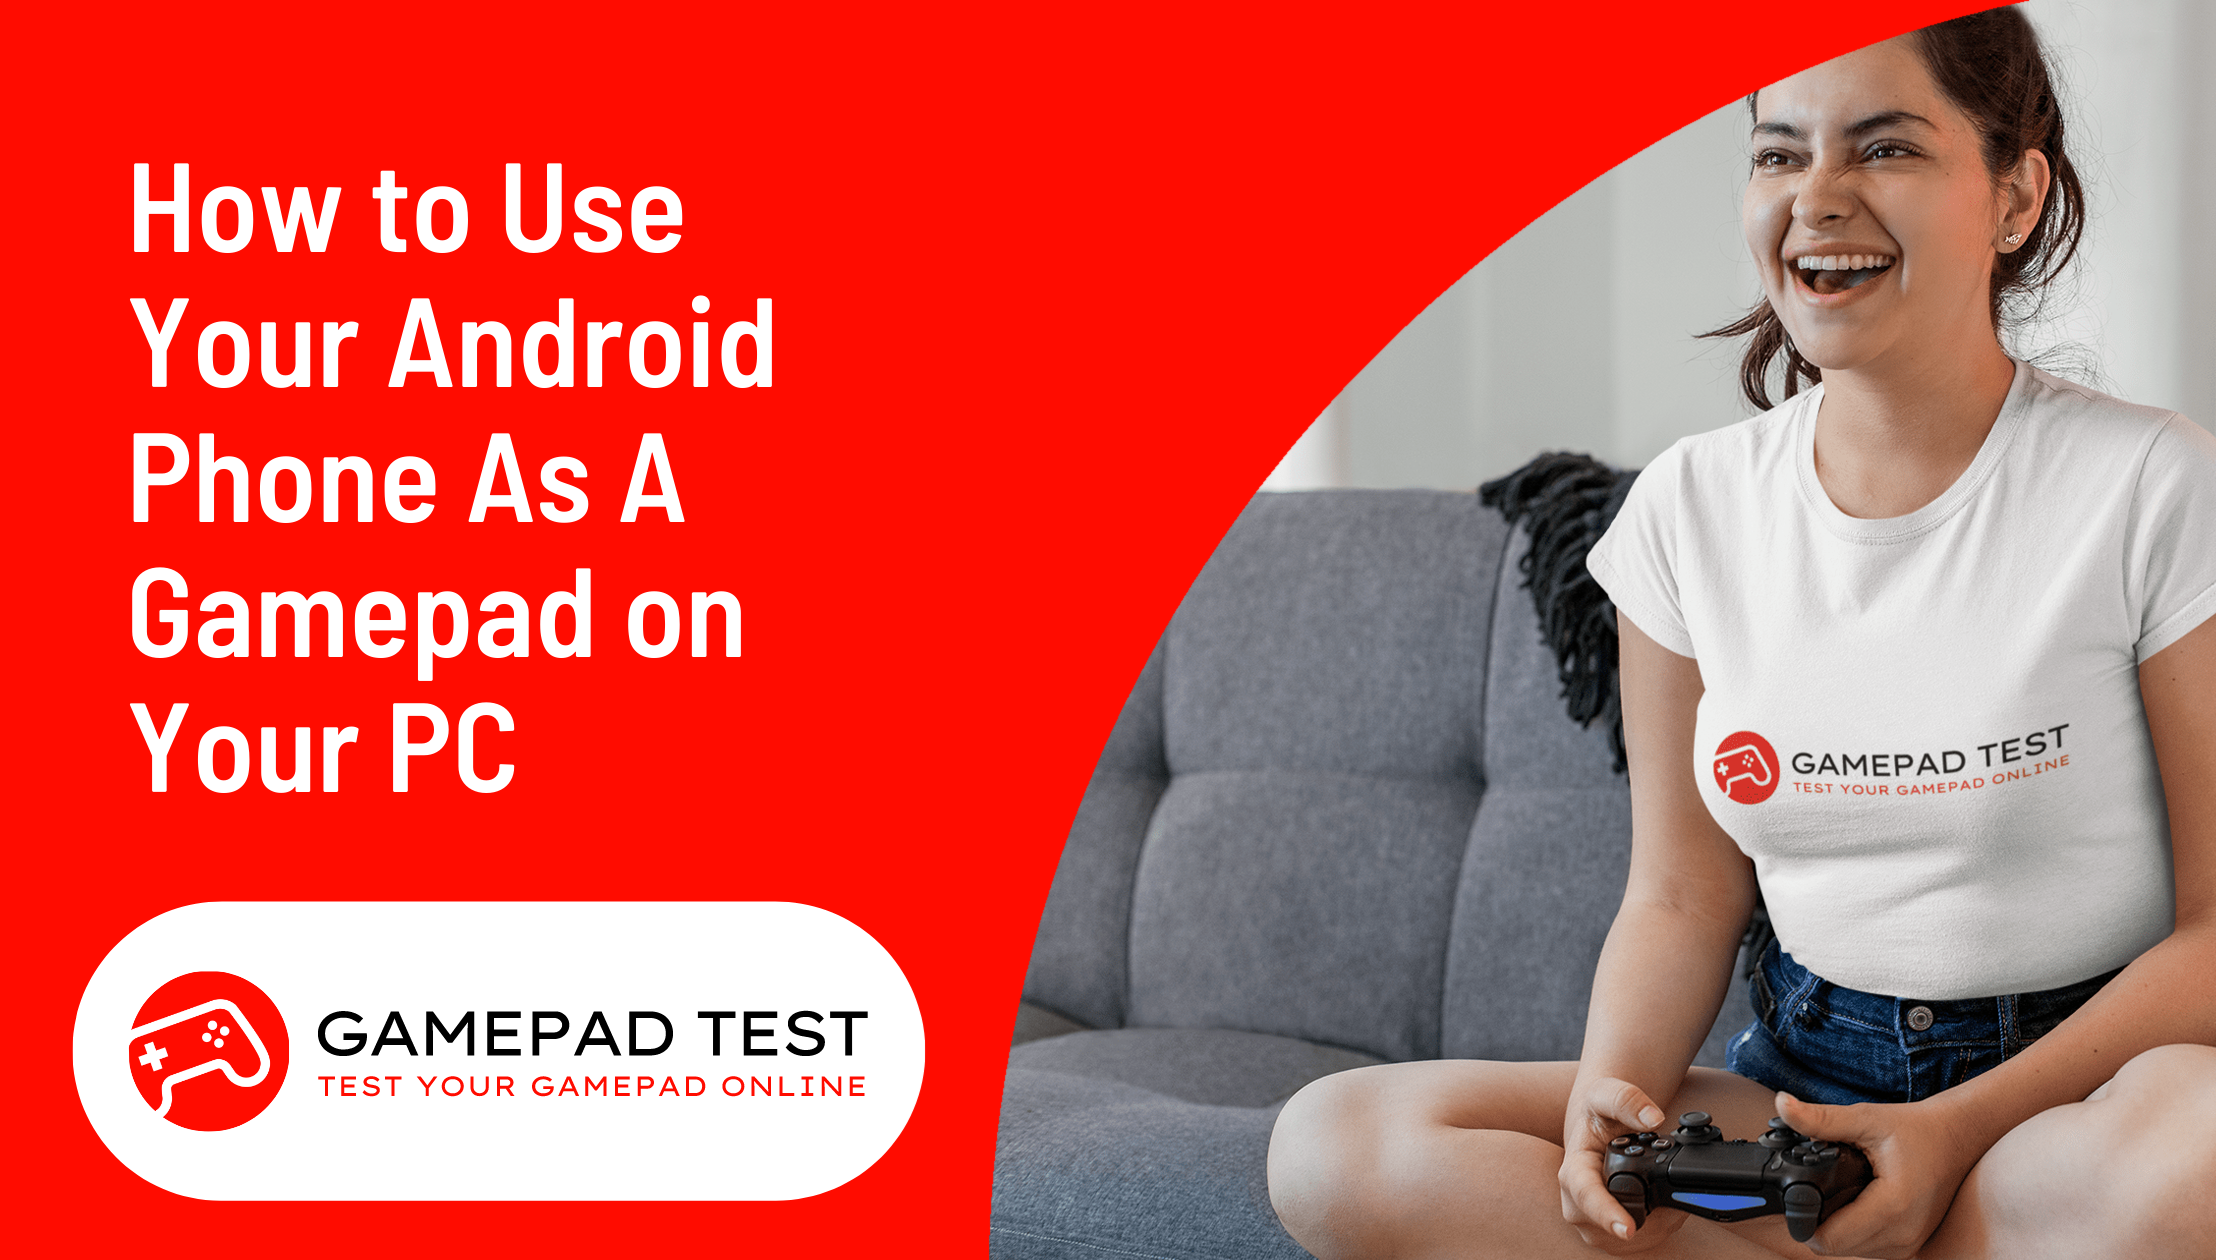 How to Use Your Android Phone As A Gamepad on Your PC - Featured